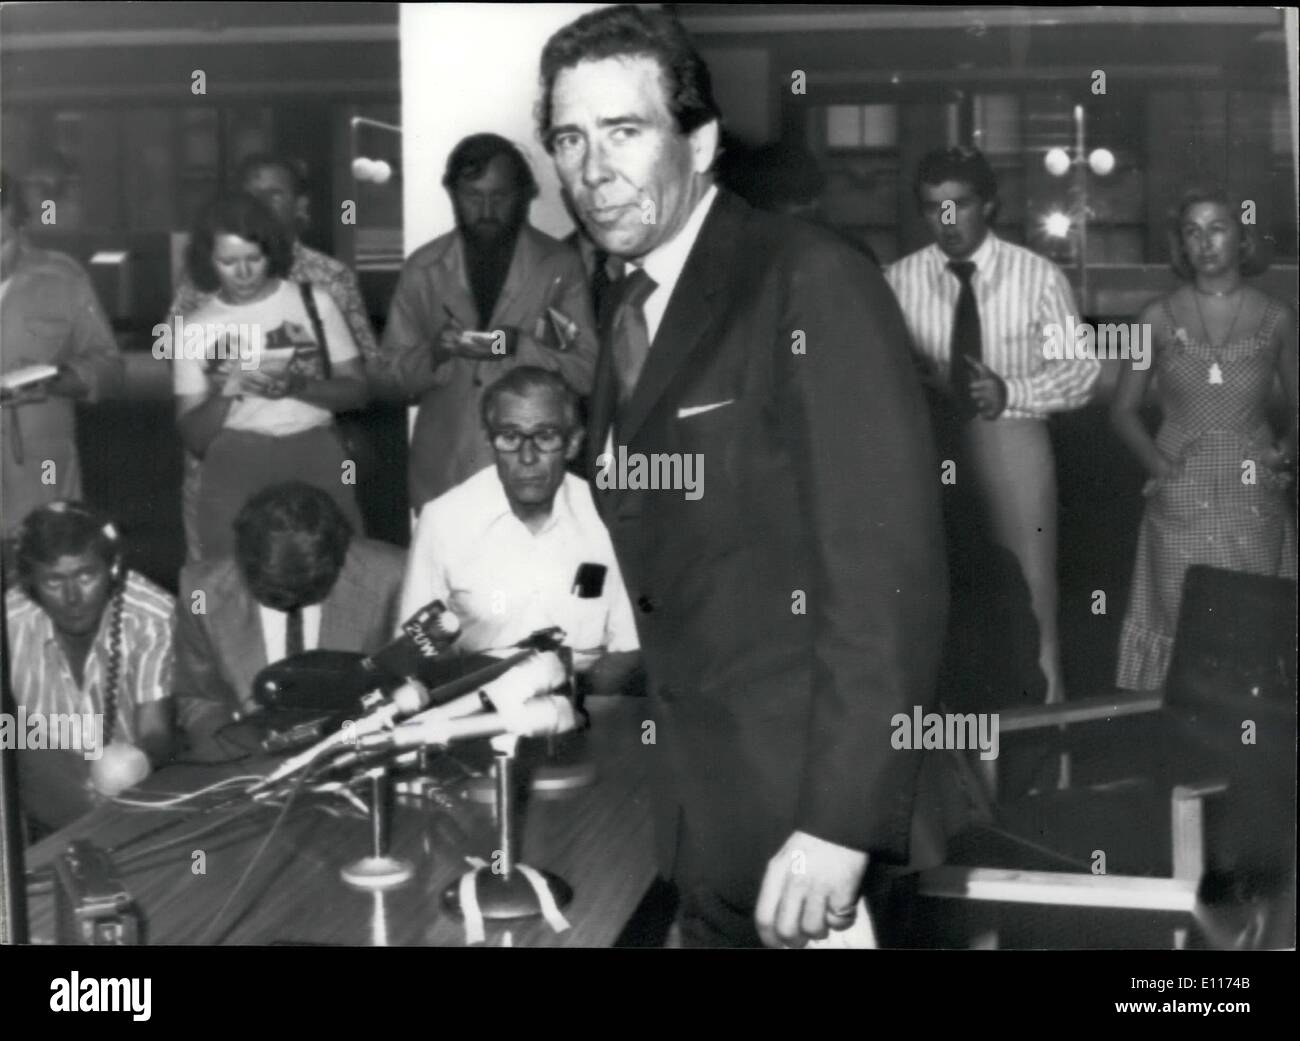 Mar. 03, 1976 - Lord Snowdon makes an emotional statement to the press in Australia.: Lord Snowdon broke down and wept today after making an emotional statement about the break-up of his marriage to Princess Margaret. His face was drawn and sad as he read out his statement to newsmen at Sydney's centre point. Photo shows a ad-faced Lord Snowdon leaves the table after making his statement in Sydney, Australia, today. Stock Photo